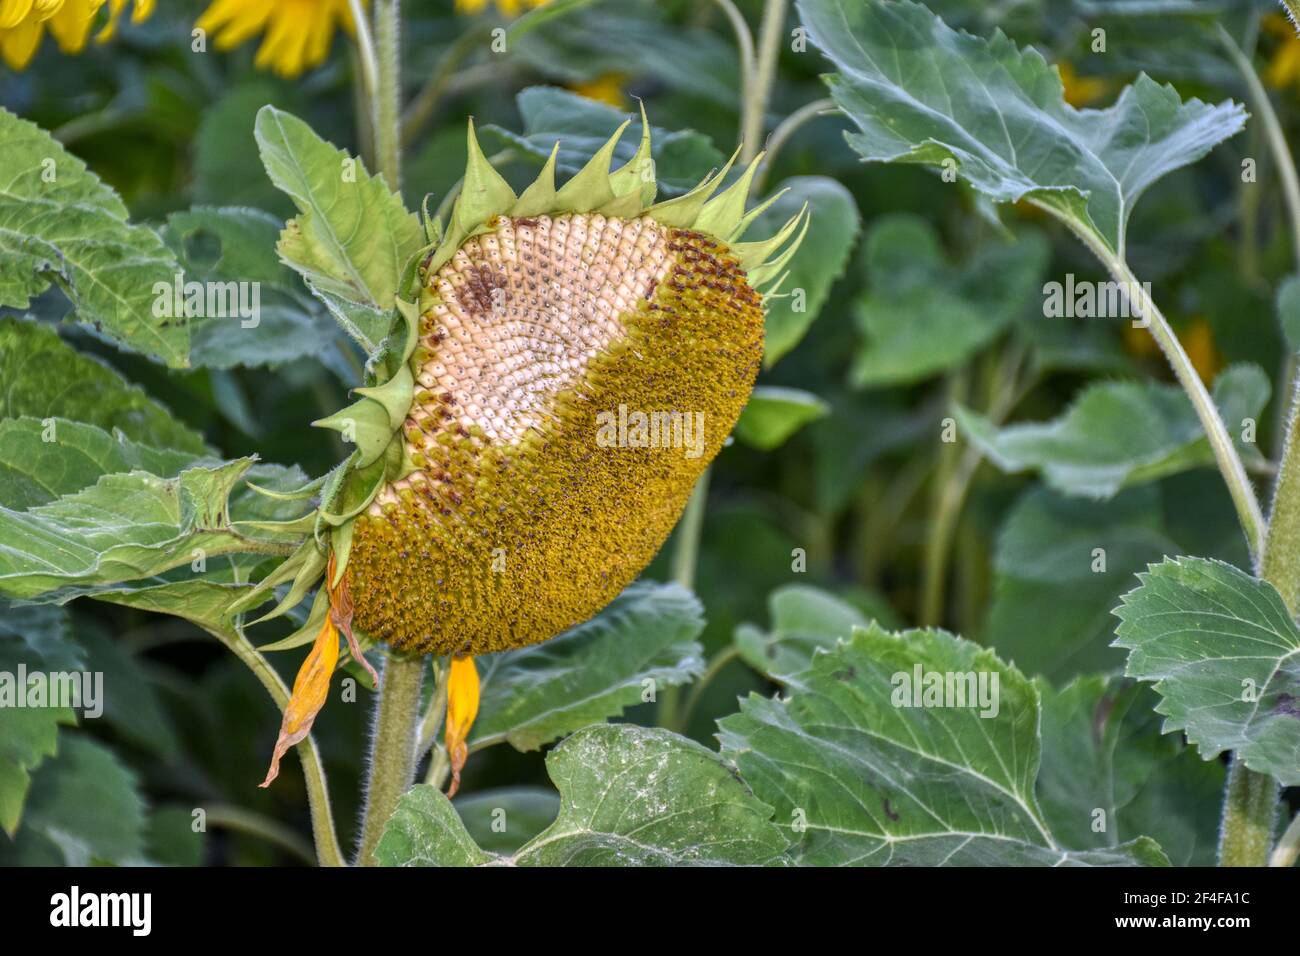 Page 3 - Blattstiel High Resolution Stock Photography and Images - Alamy